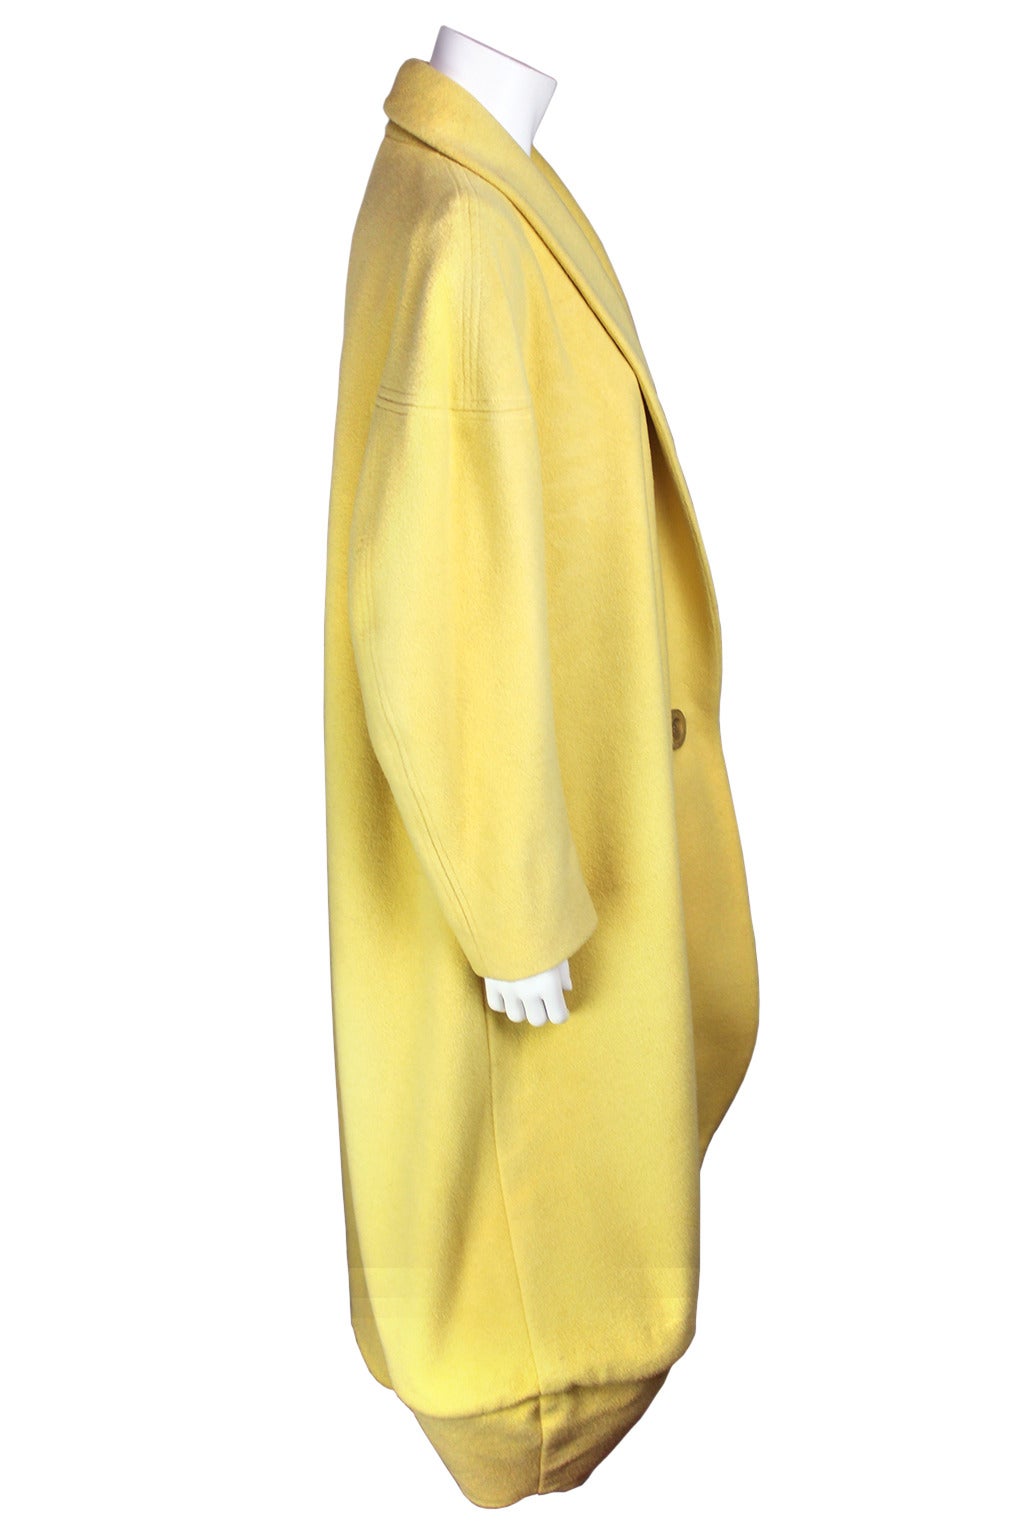 This stunning garment is a fine example of John Galliano's early designs. The wool is in a soft butter hue. It has a wide shawl collar which closes in a single button. The hem is cleverly constructed with a seamed cocoon shape. This is a wonderful